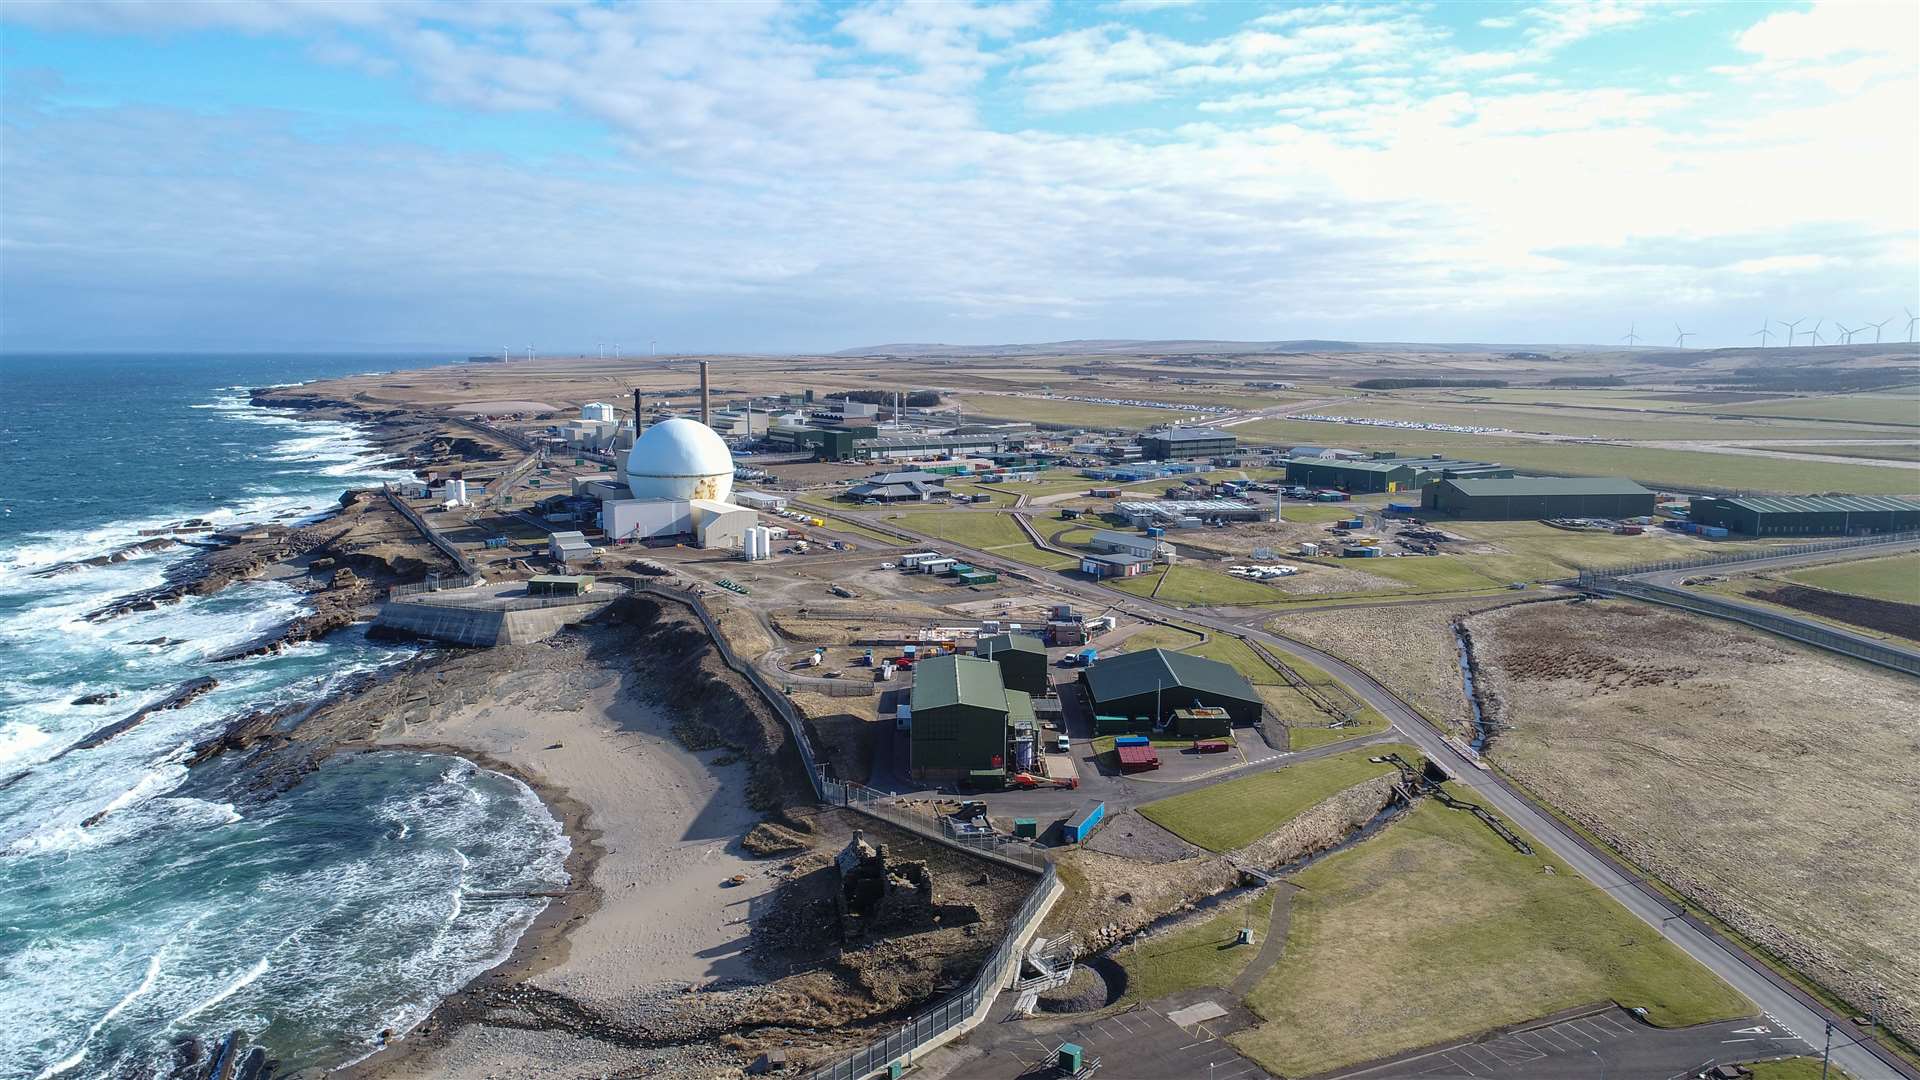 The research will look at the issue of particles in the marine environment near Dounreay. Picture: DSRL and NDA